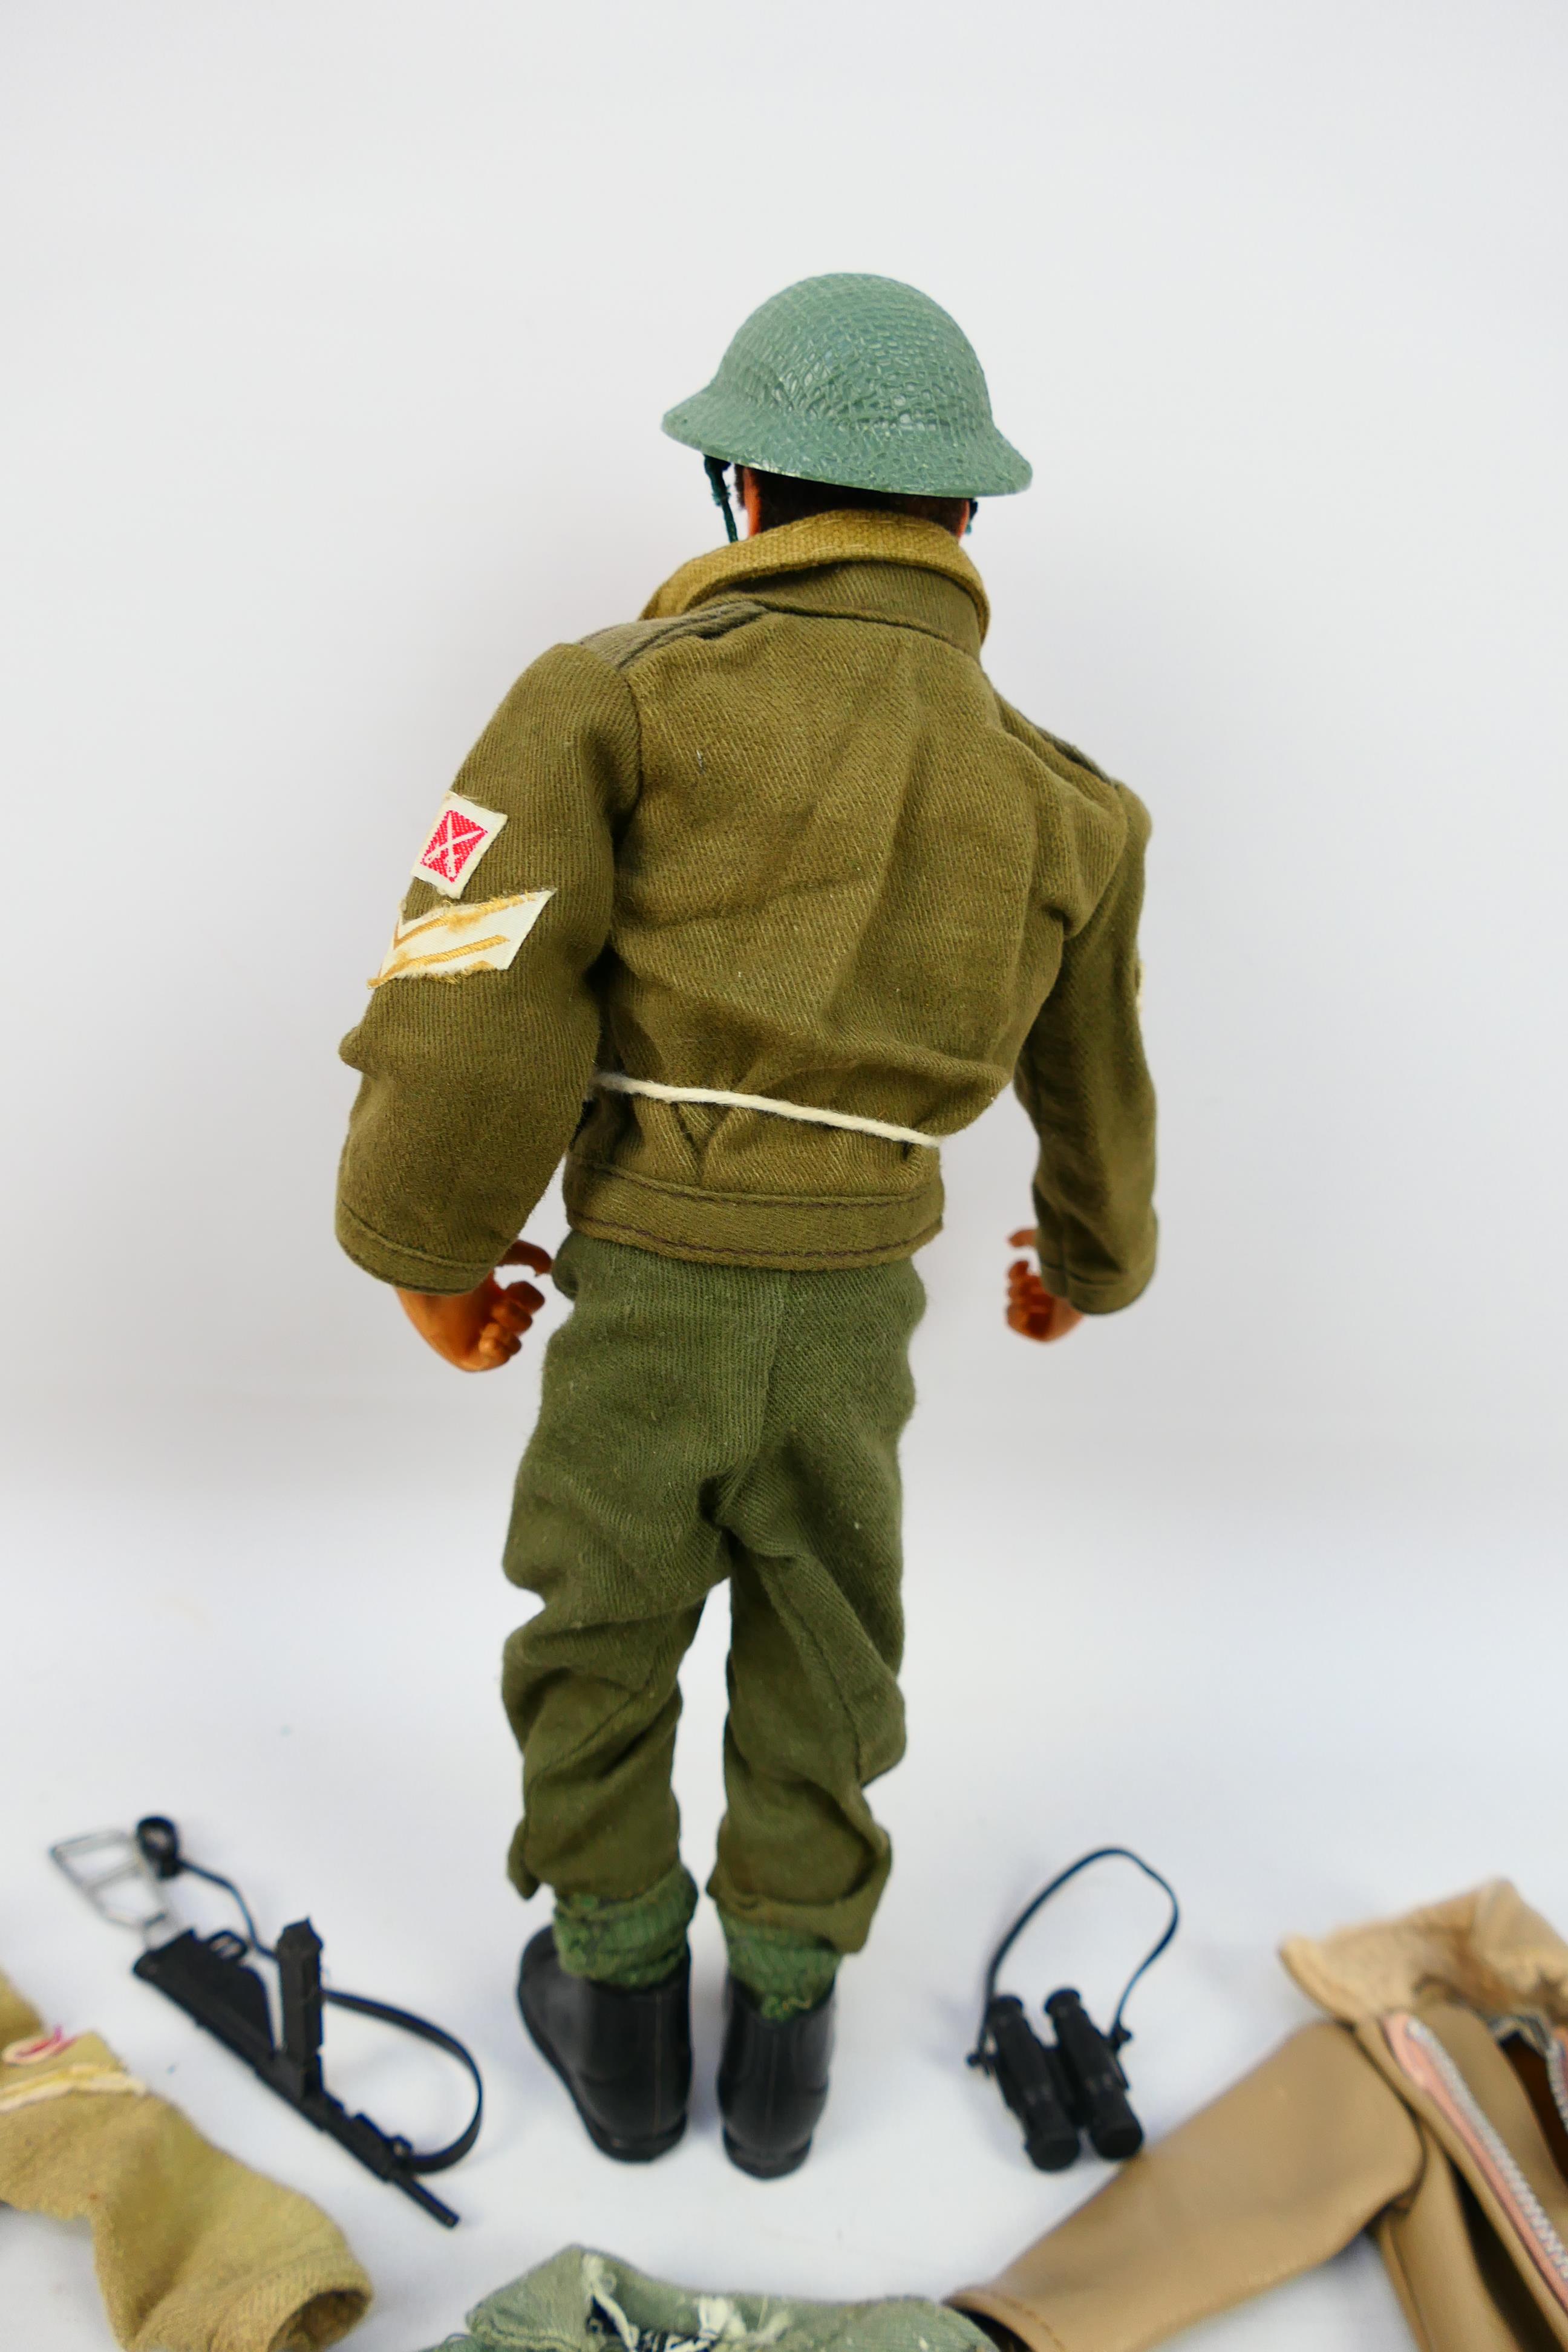 Palitoy - Action Man - A 1978 Action Man action figure with Flock hair and eagle eyes in a British - Image 10 of 16